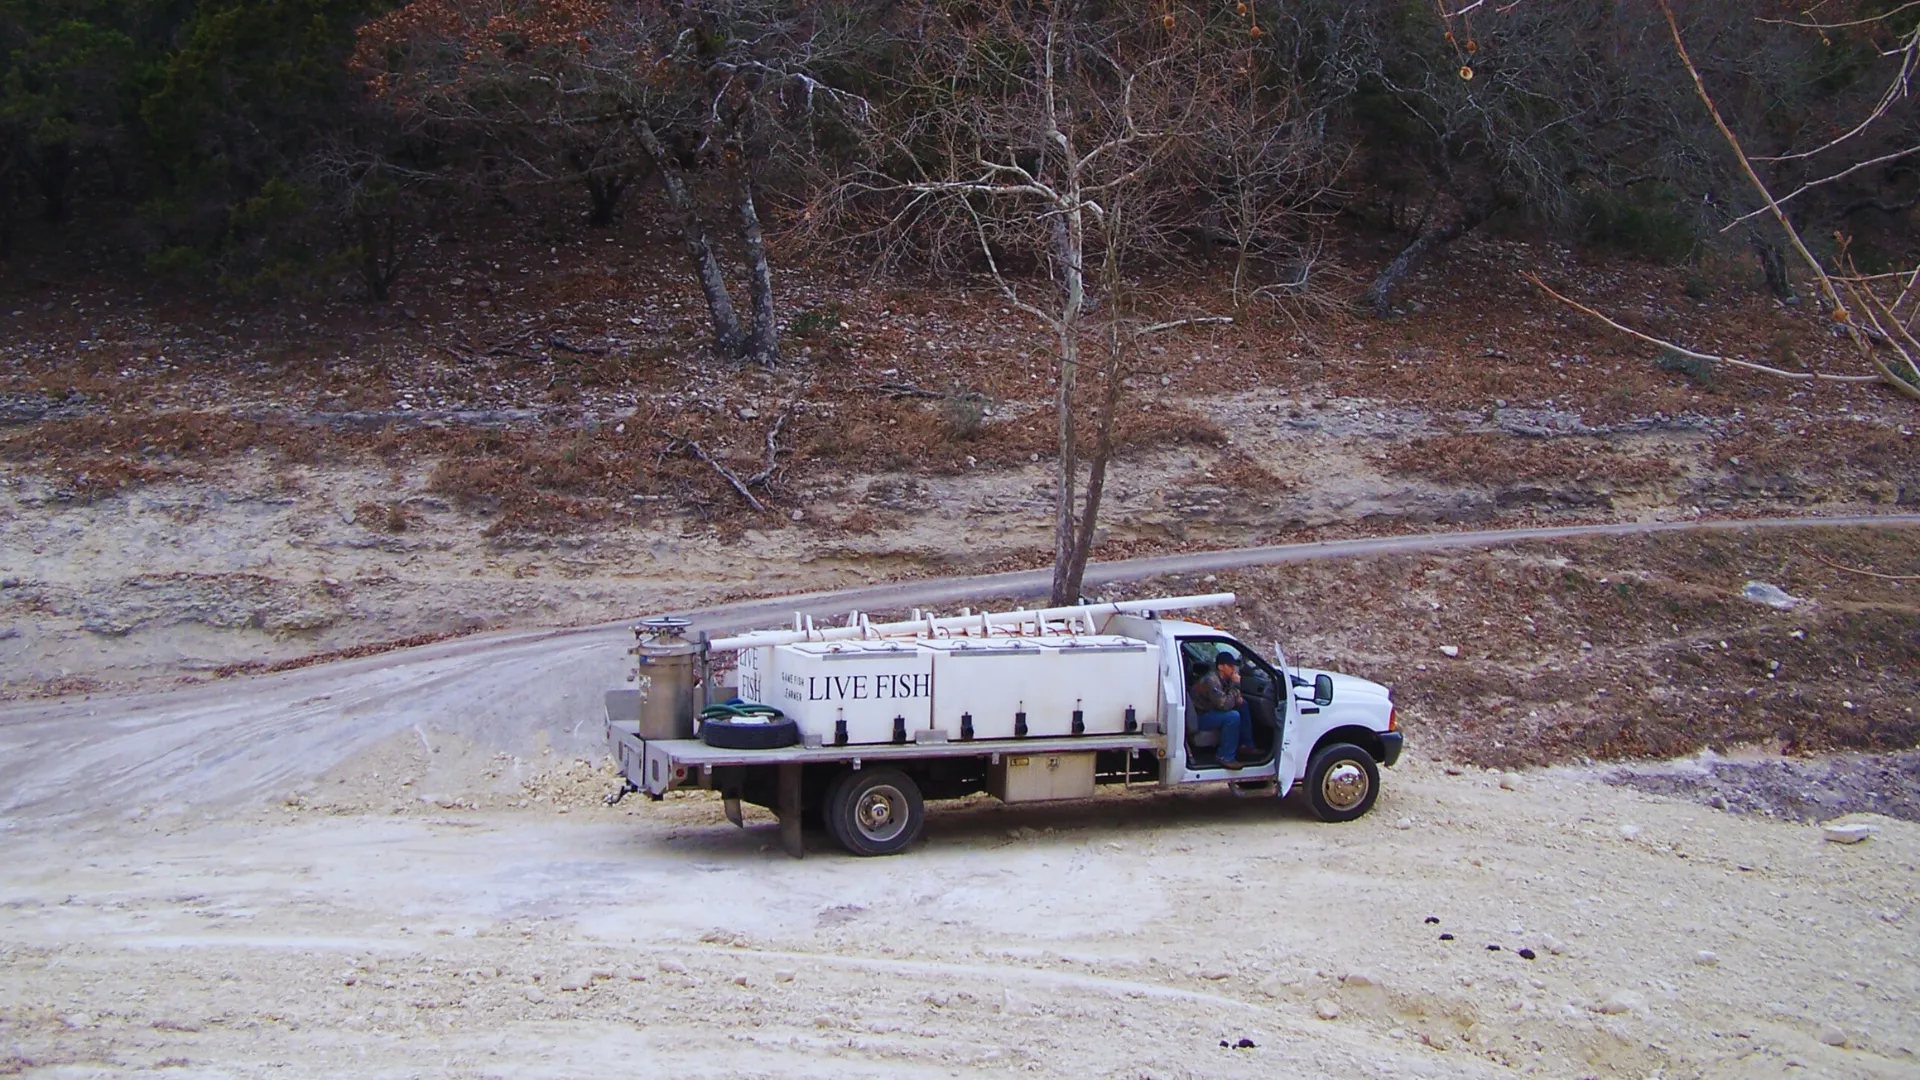 Delivery truck at a customer pond in the Texas Hill Country